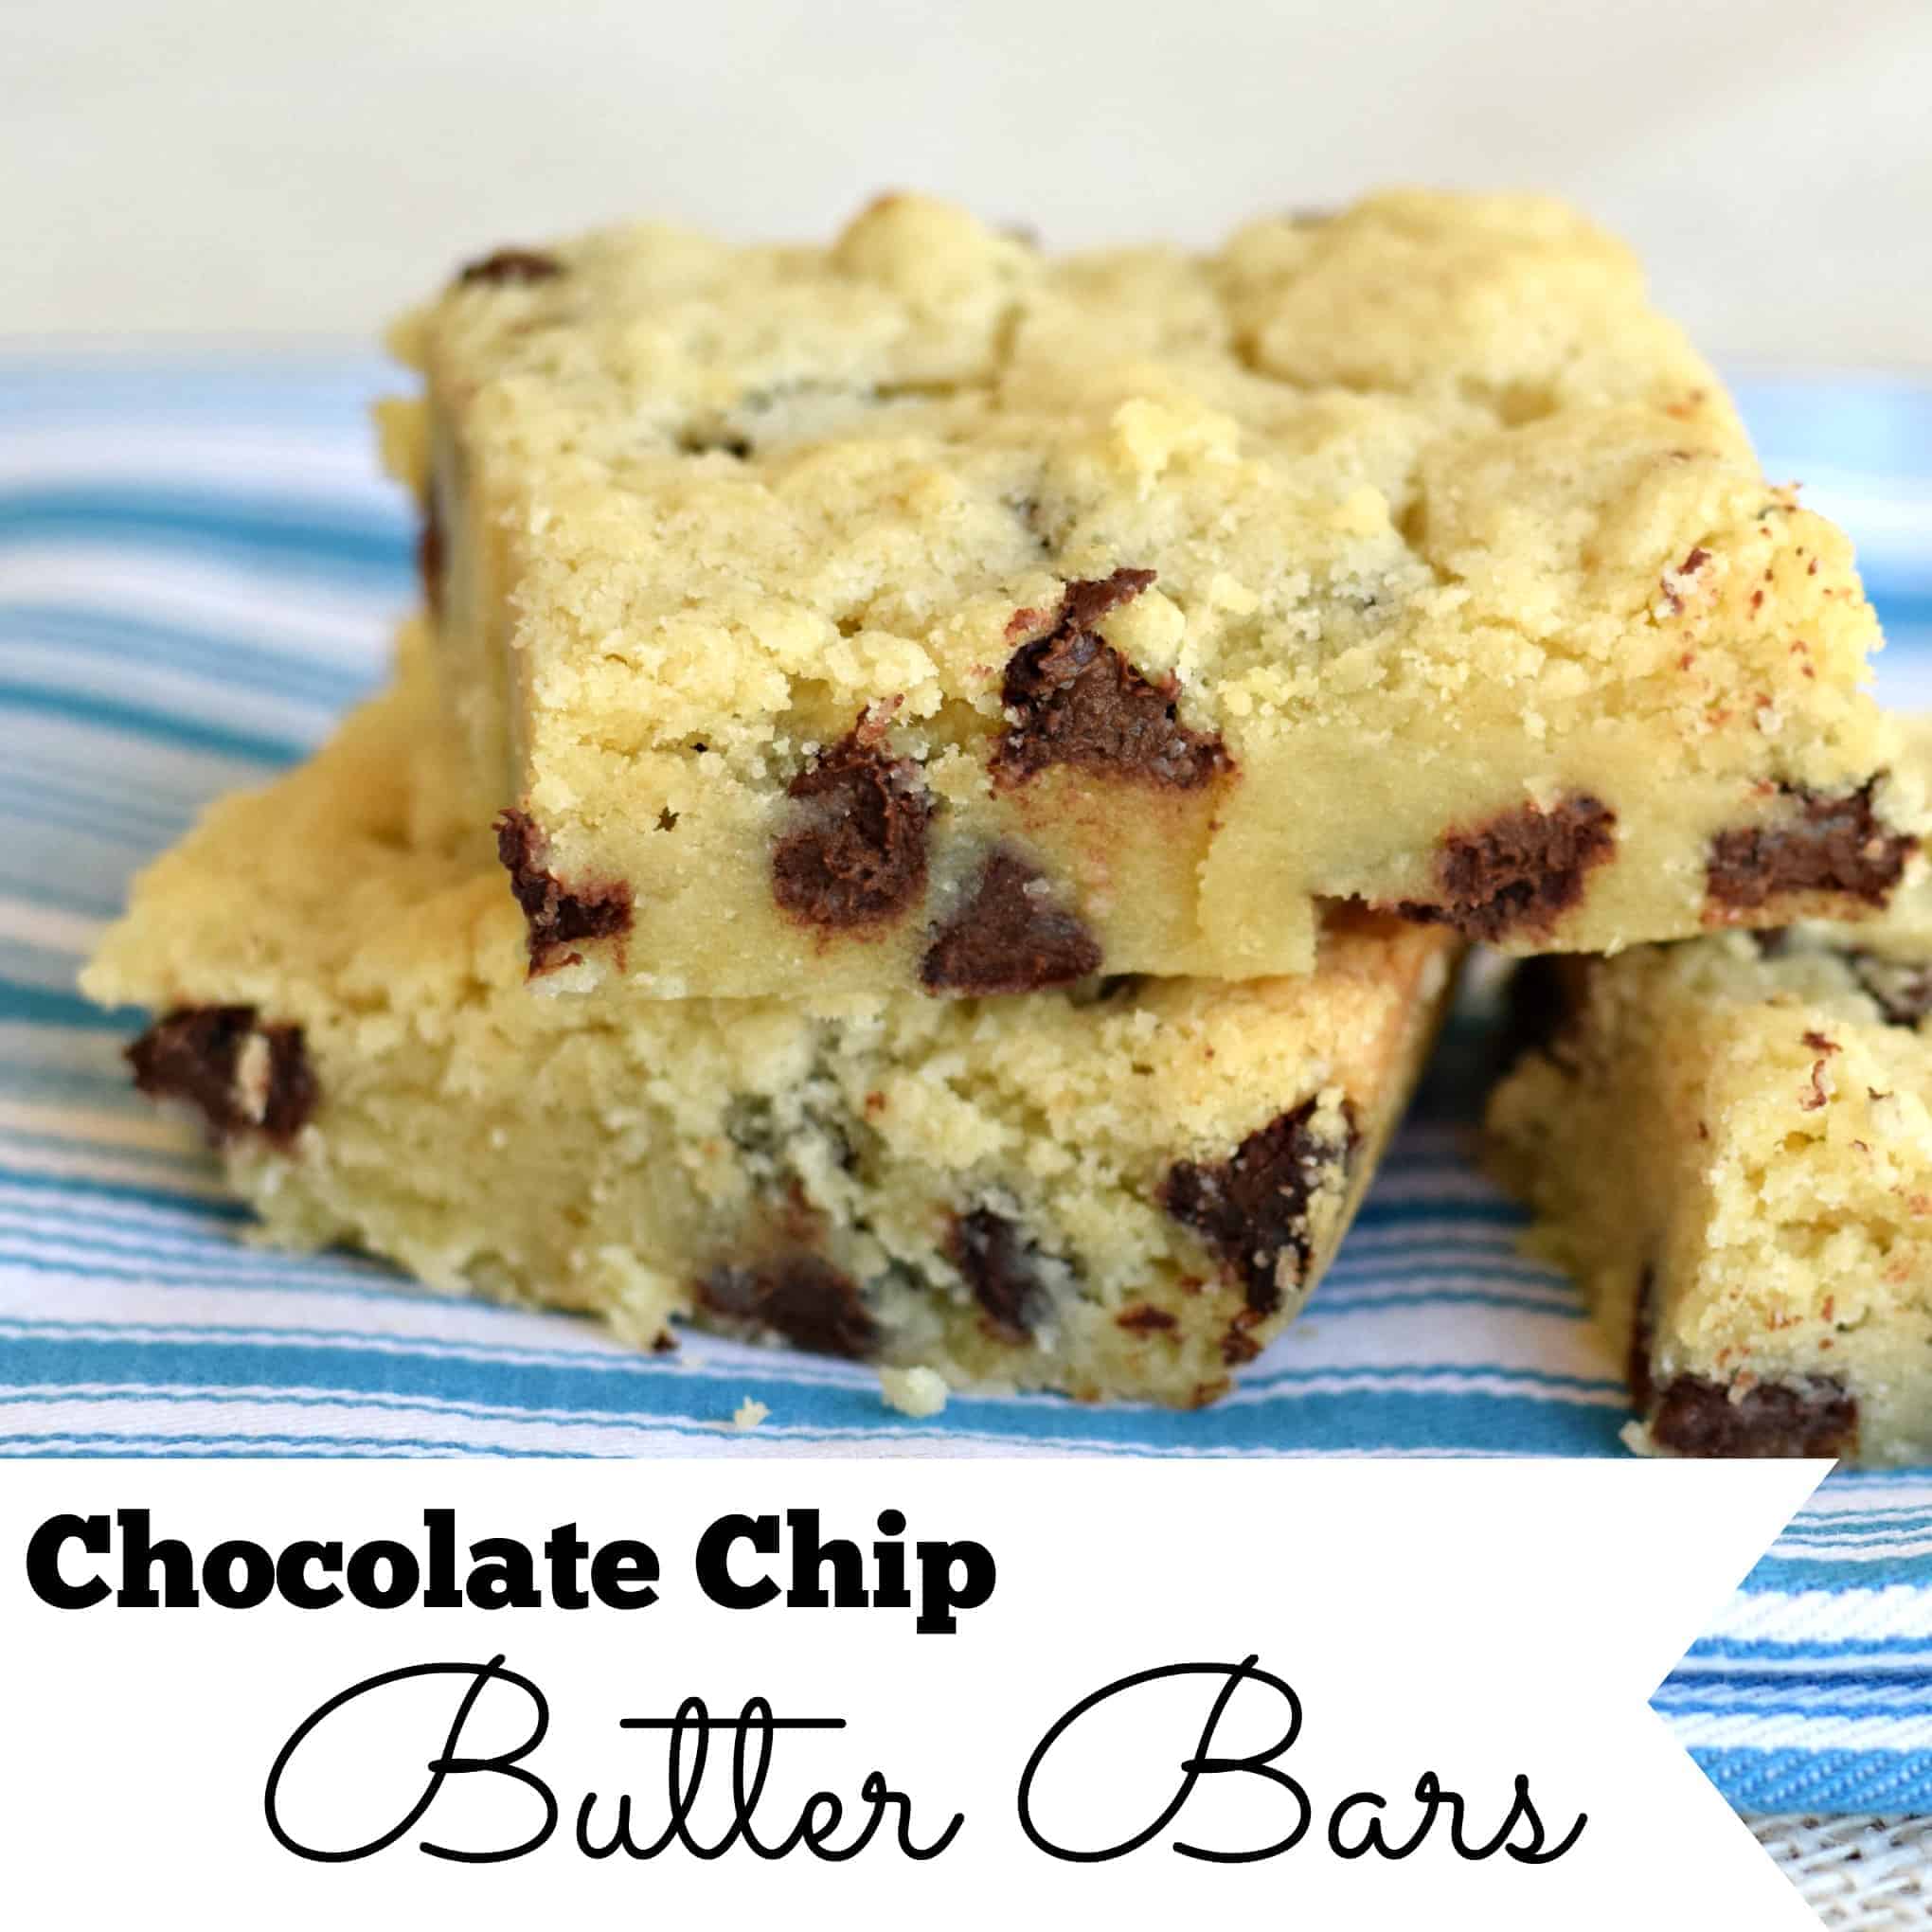 Chocolate Chip Butter Bars & Teaching Kids To Cook Guide!